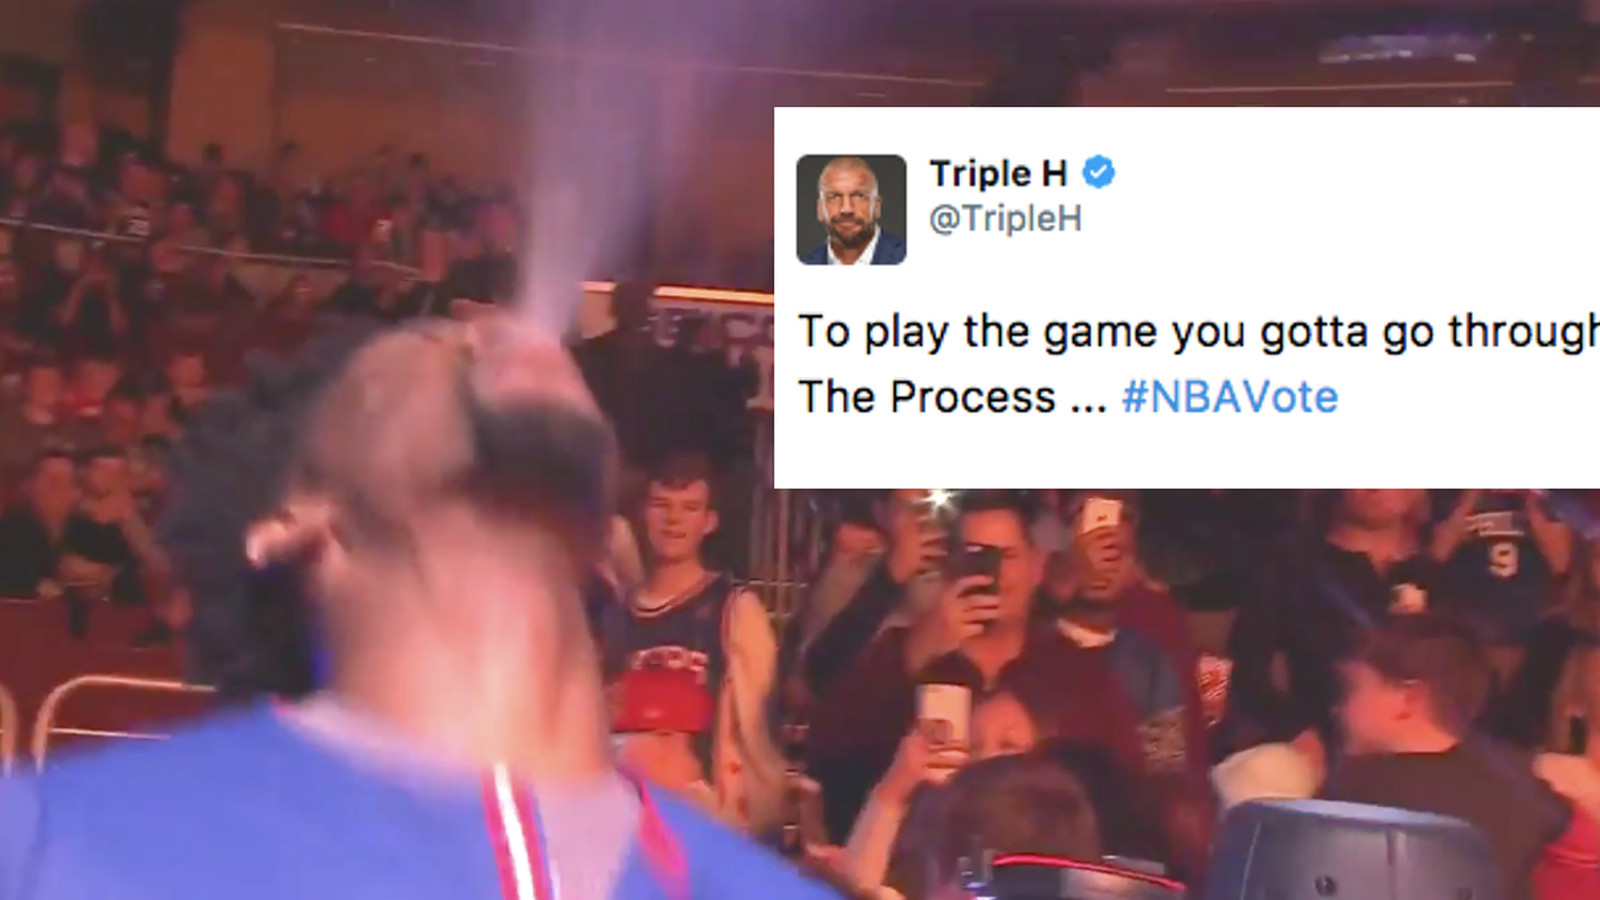 Joel Embiid paid homage to WWE's Triple H by copying his water